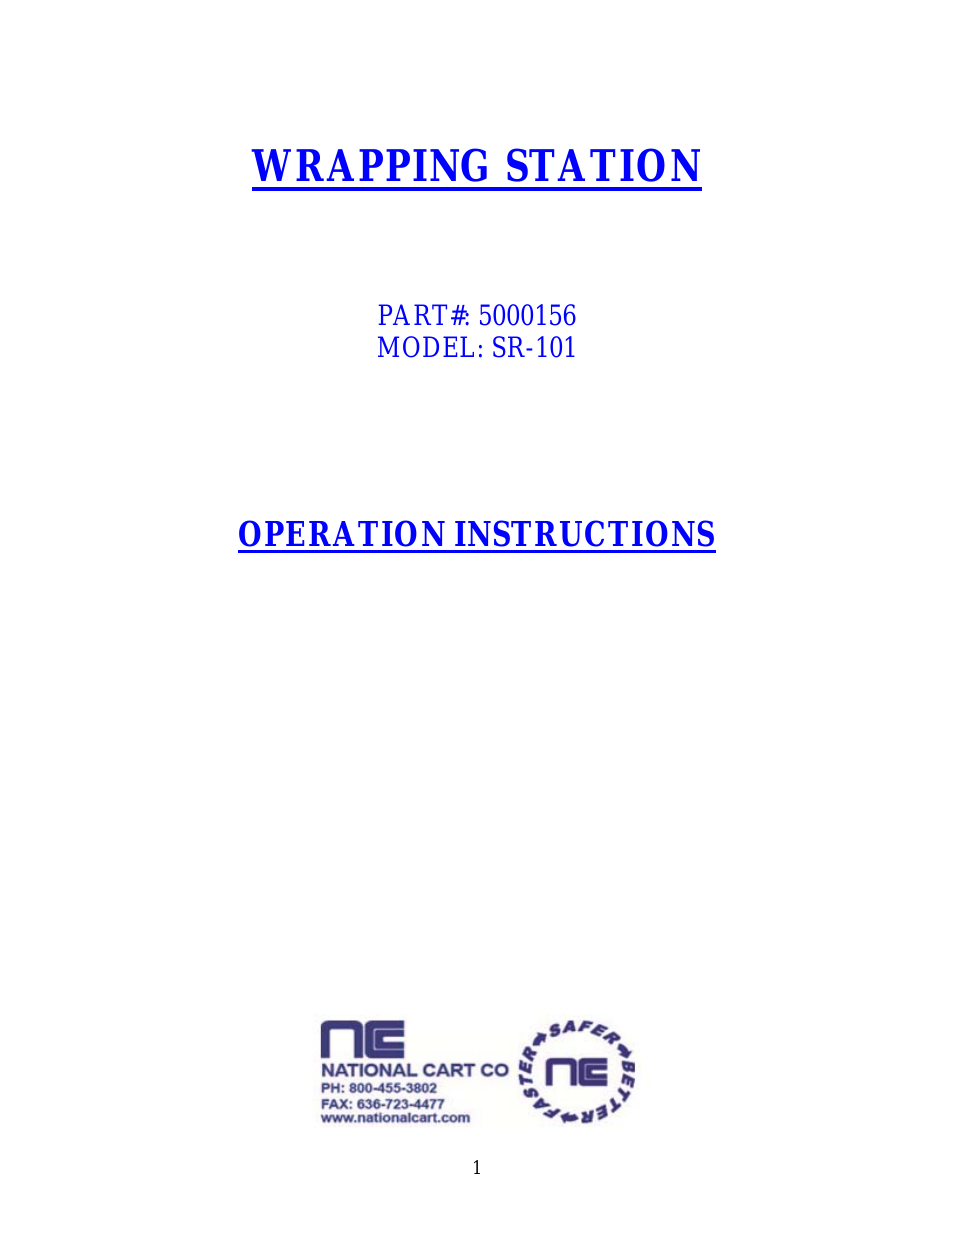 SR-101 WRAPPING STATION